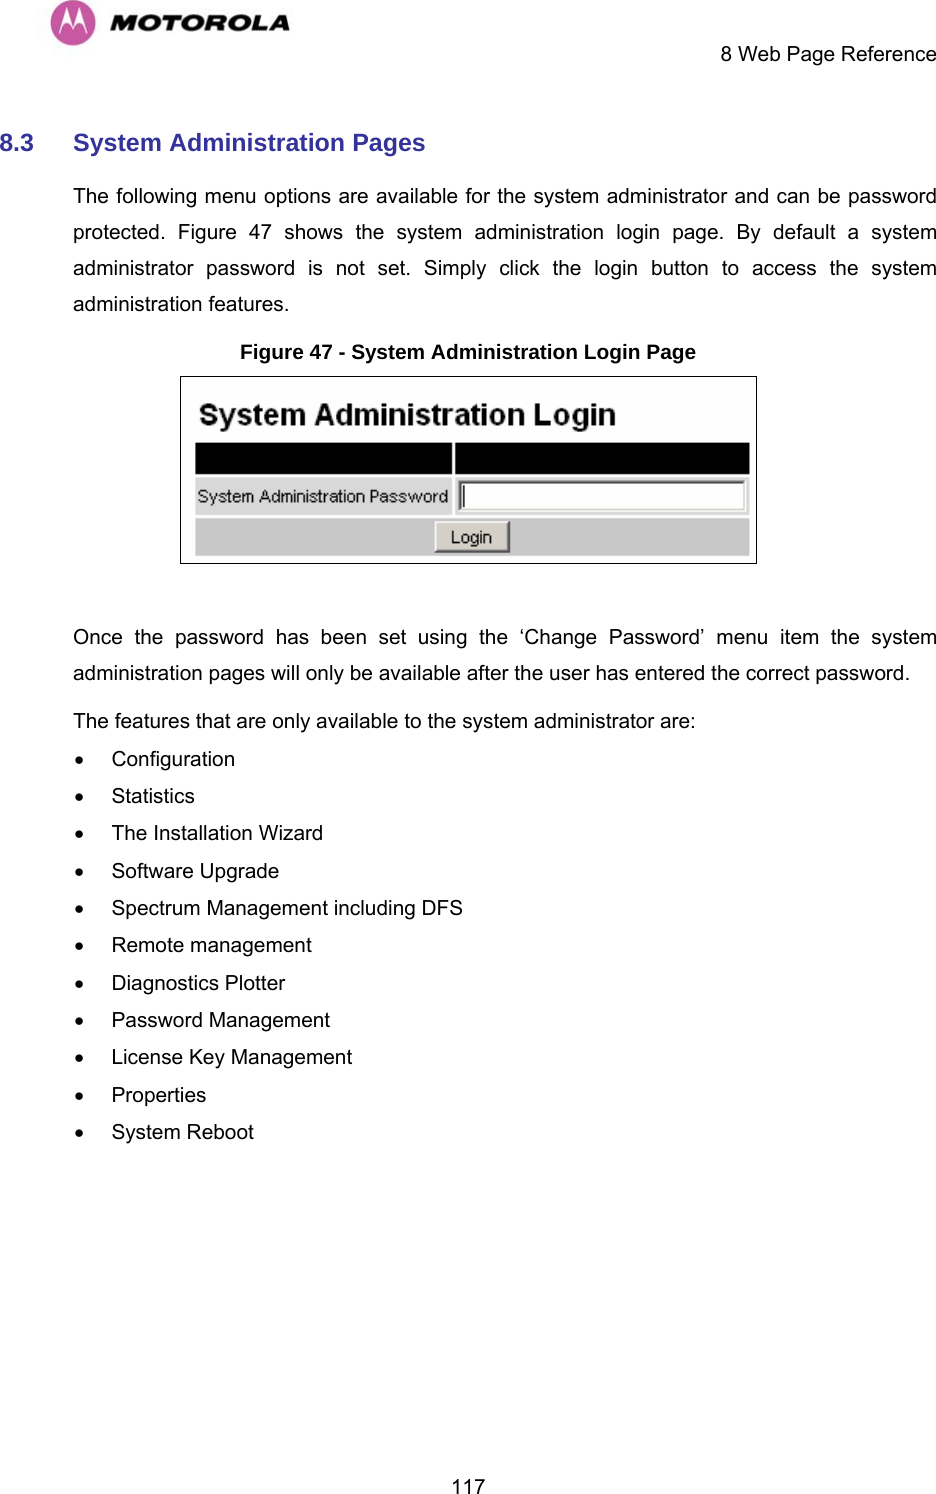     8 Web Page Reference  1178.3  System Administration Pages  The following menu options are available for the system administrator and can be password protected.  Figure 47 shows the system administration login page. By default a system administrator password is not set. Simply click the login button to access the system administration features.  Figure 47 - System Administration Login Page   Once the password has been set using the ‘Change Password’ menu item the system administration pages will only be available after the user has entered the correct password. The features that are only available to the system administrator are: • Configuration • Statistics •  The Installation Wizard • Software Upgrade •  Spectrum Management including DFS • Remote management • Diagnostics Plotter • Password Management •  License Key Management • Properties • System Reboot 